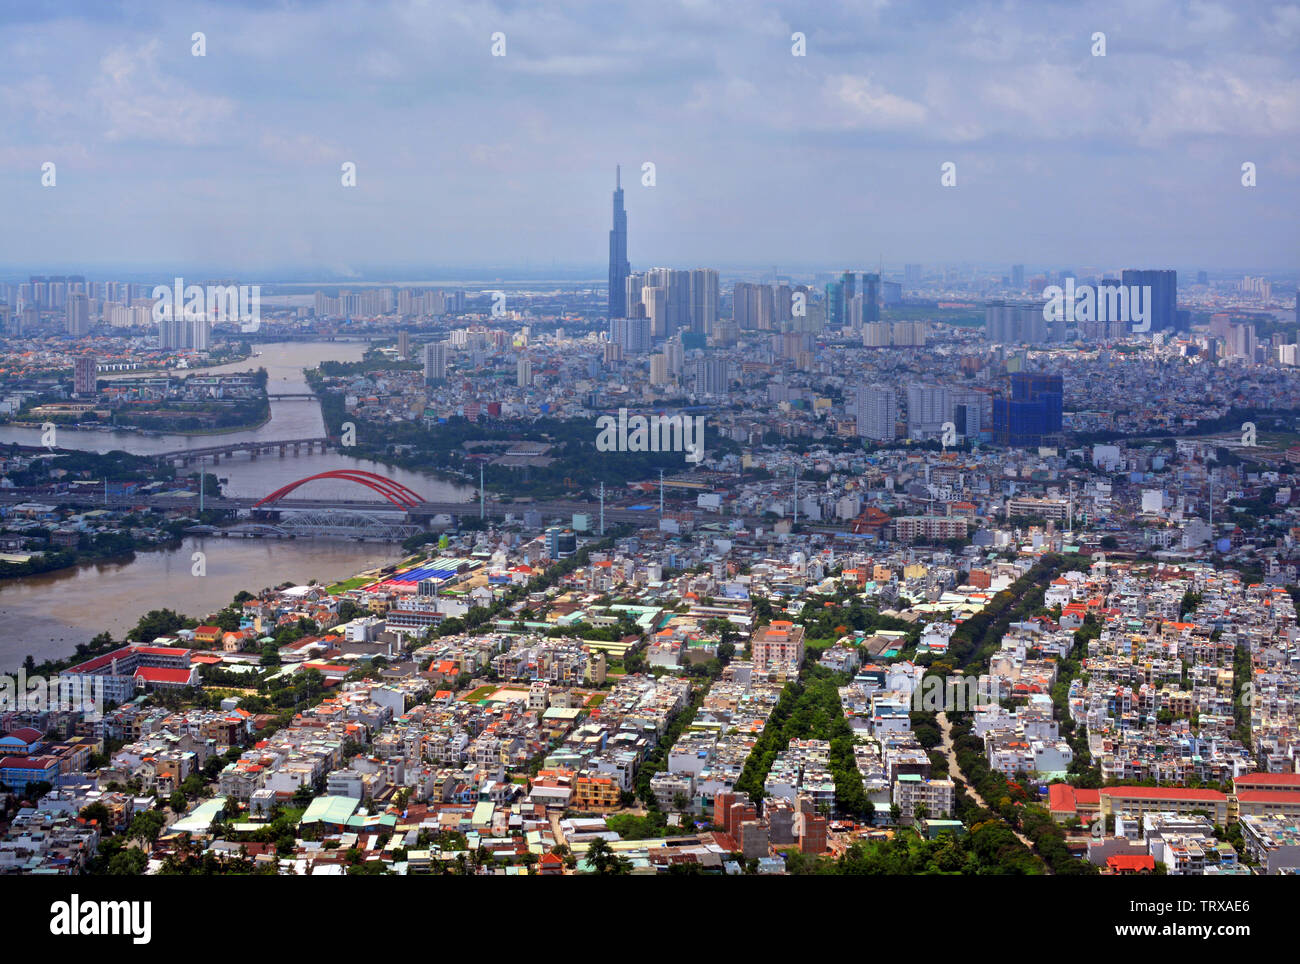 Arriving into Ho Chi Minh City, Vietnam - an aerial cityscape panorama featuring the Saigon River. Stock Photo